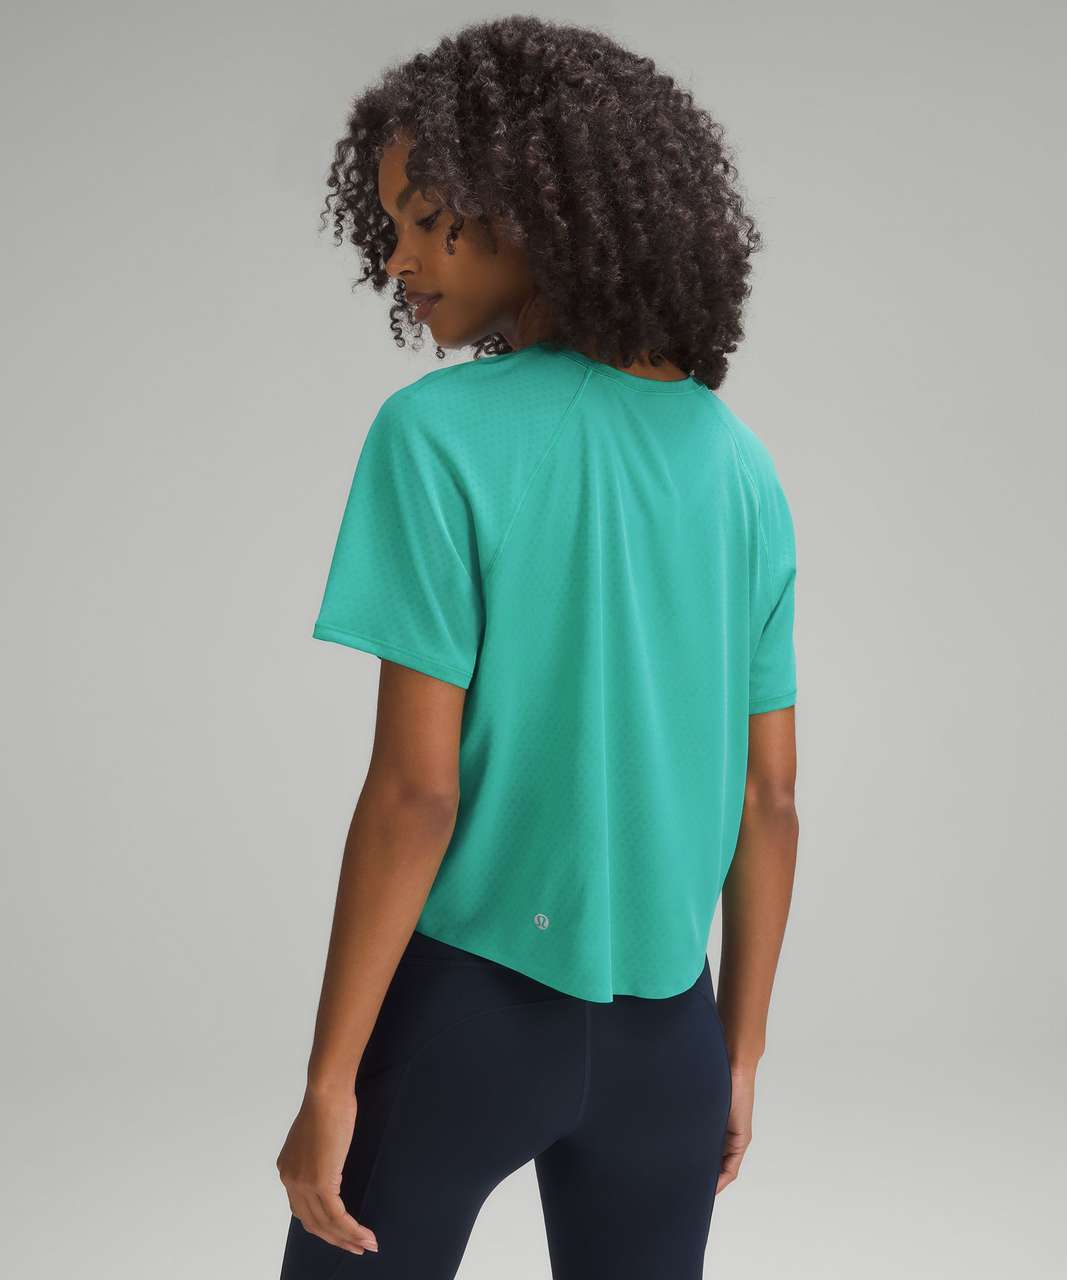 Lululemon Fast and Free Race Length T-Shirt - Kelly Green